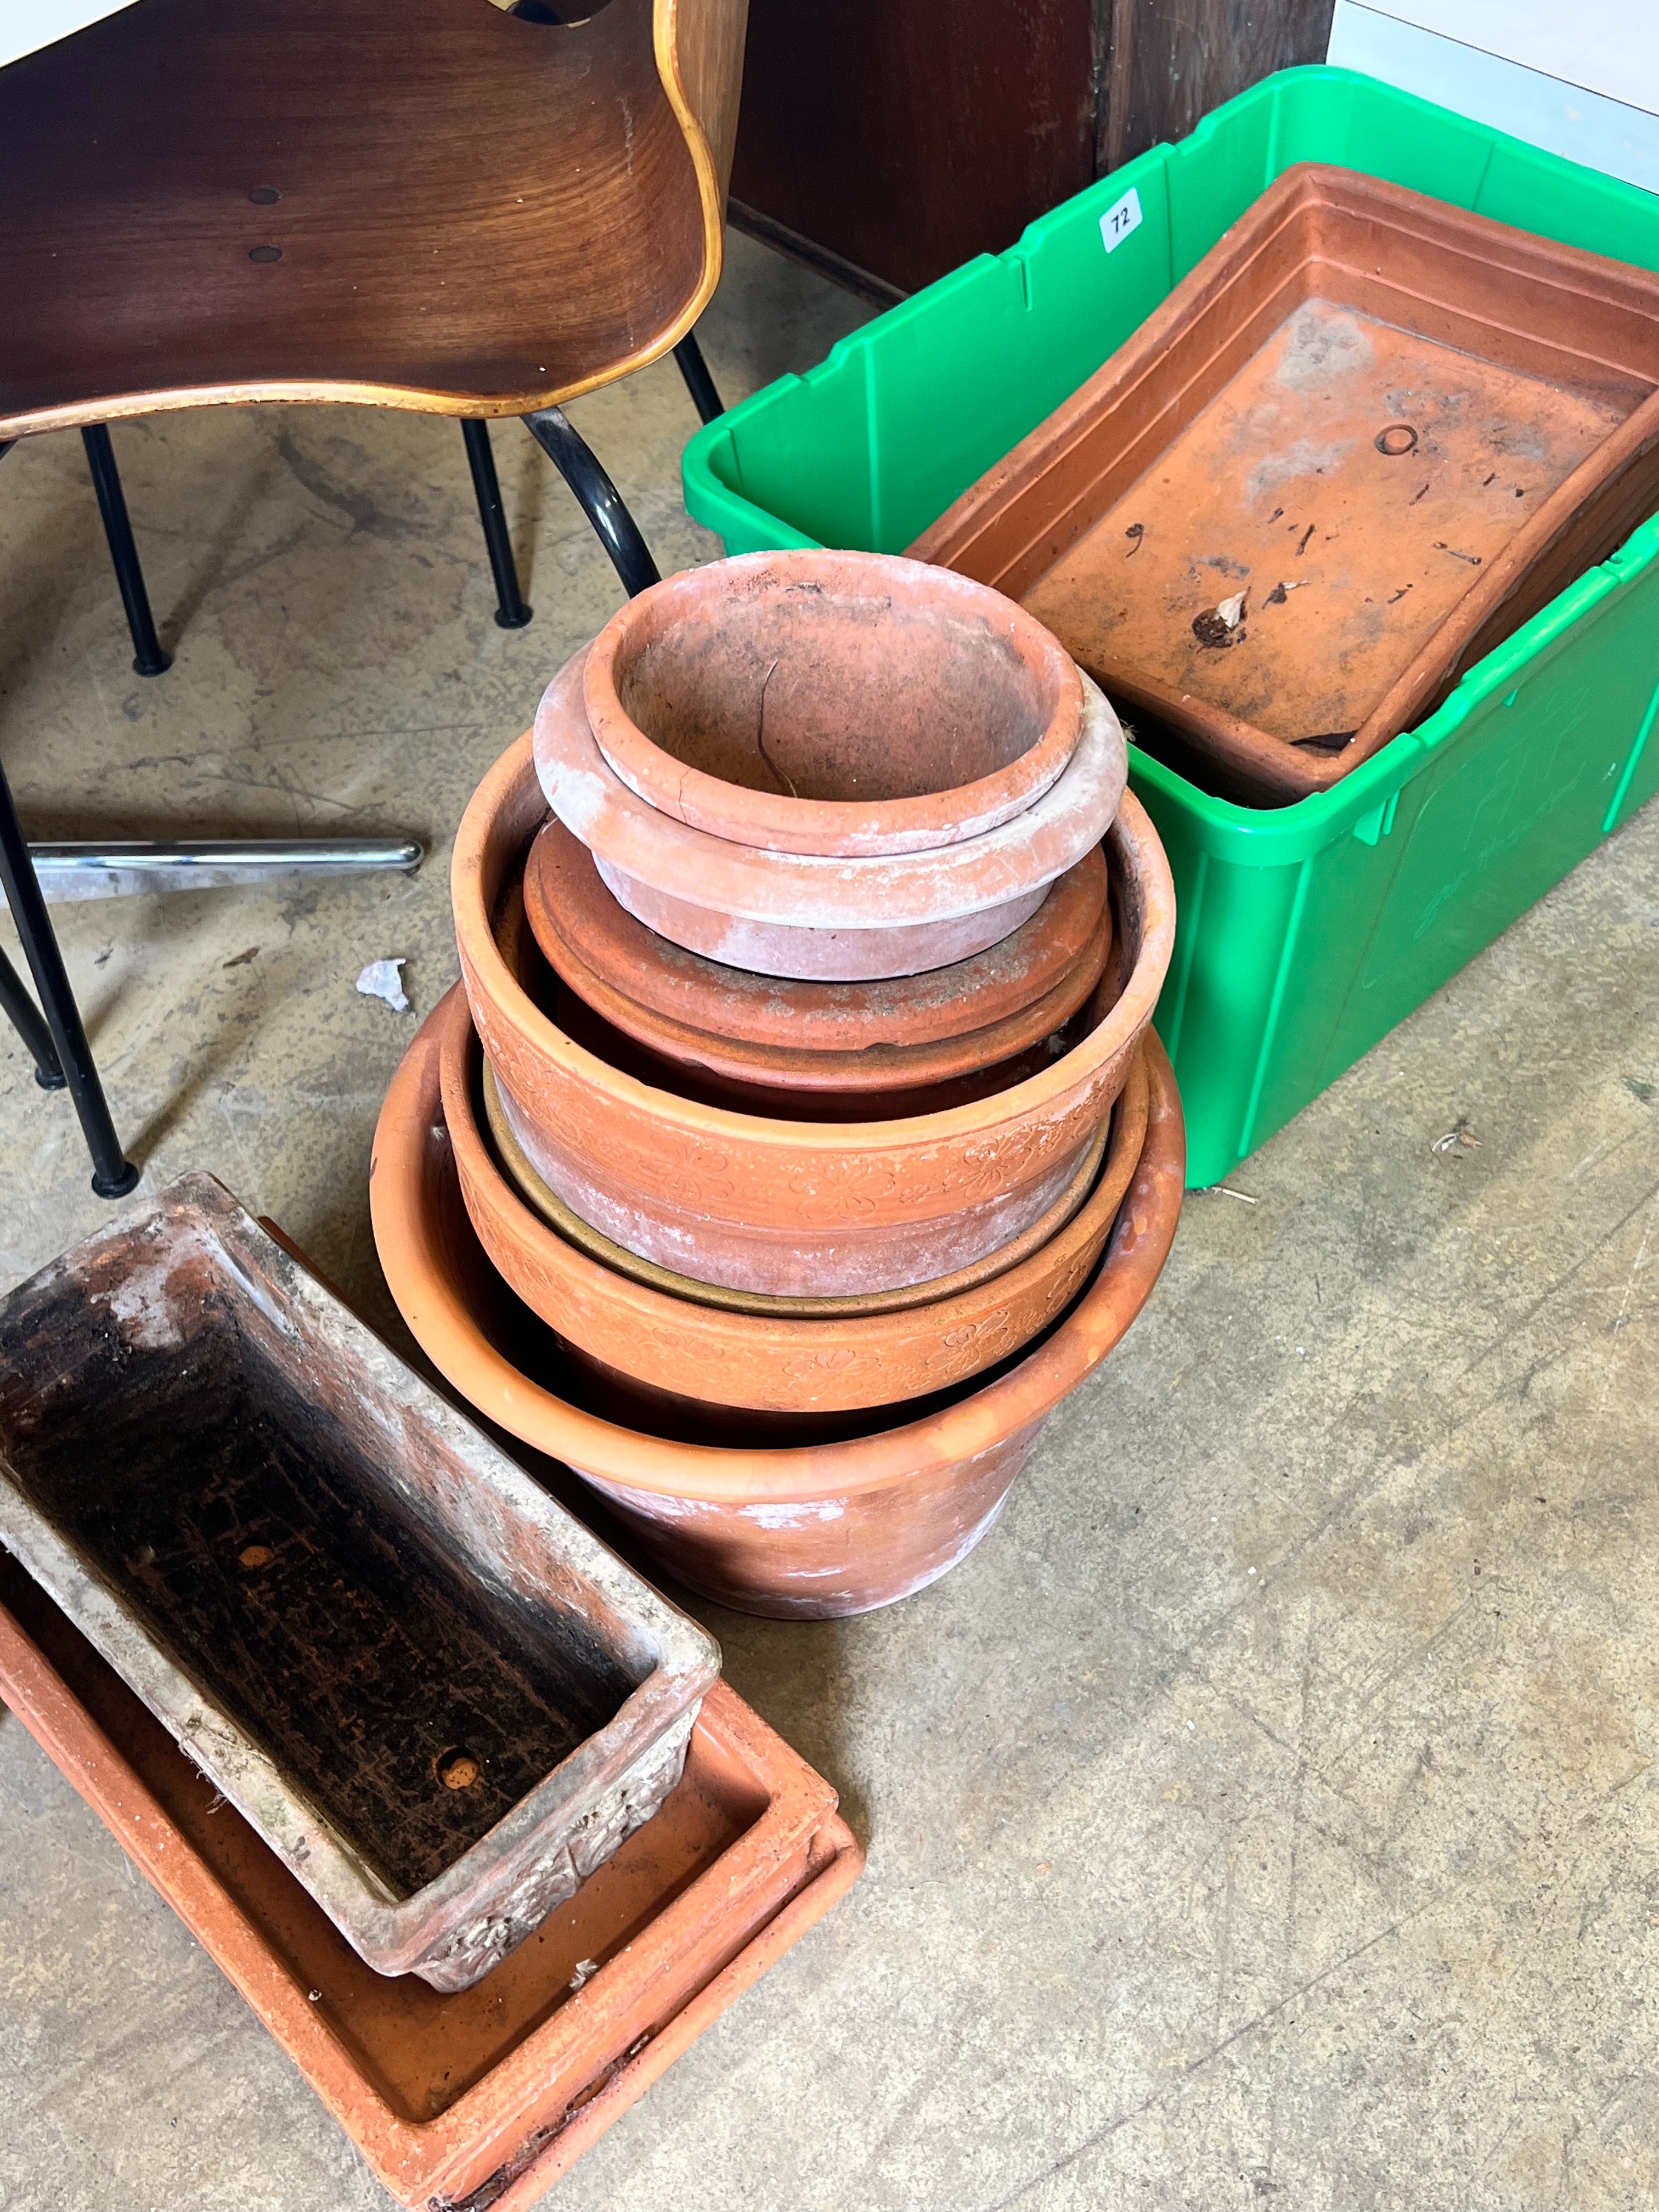 Approximately fifty assorted terracotta garden pots